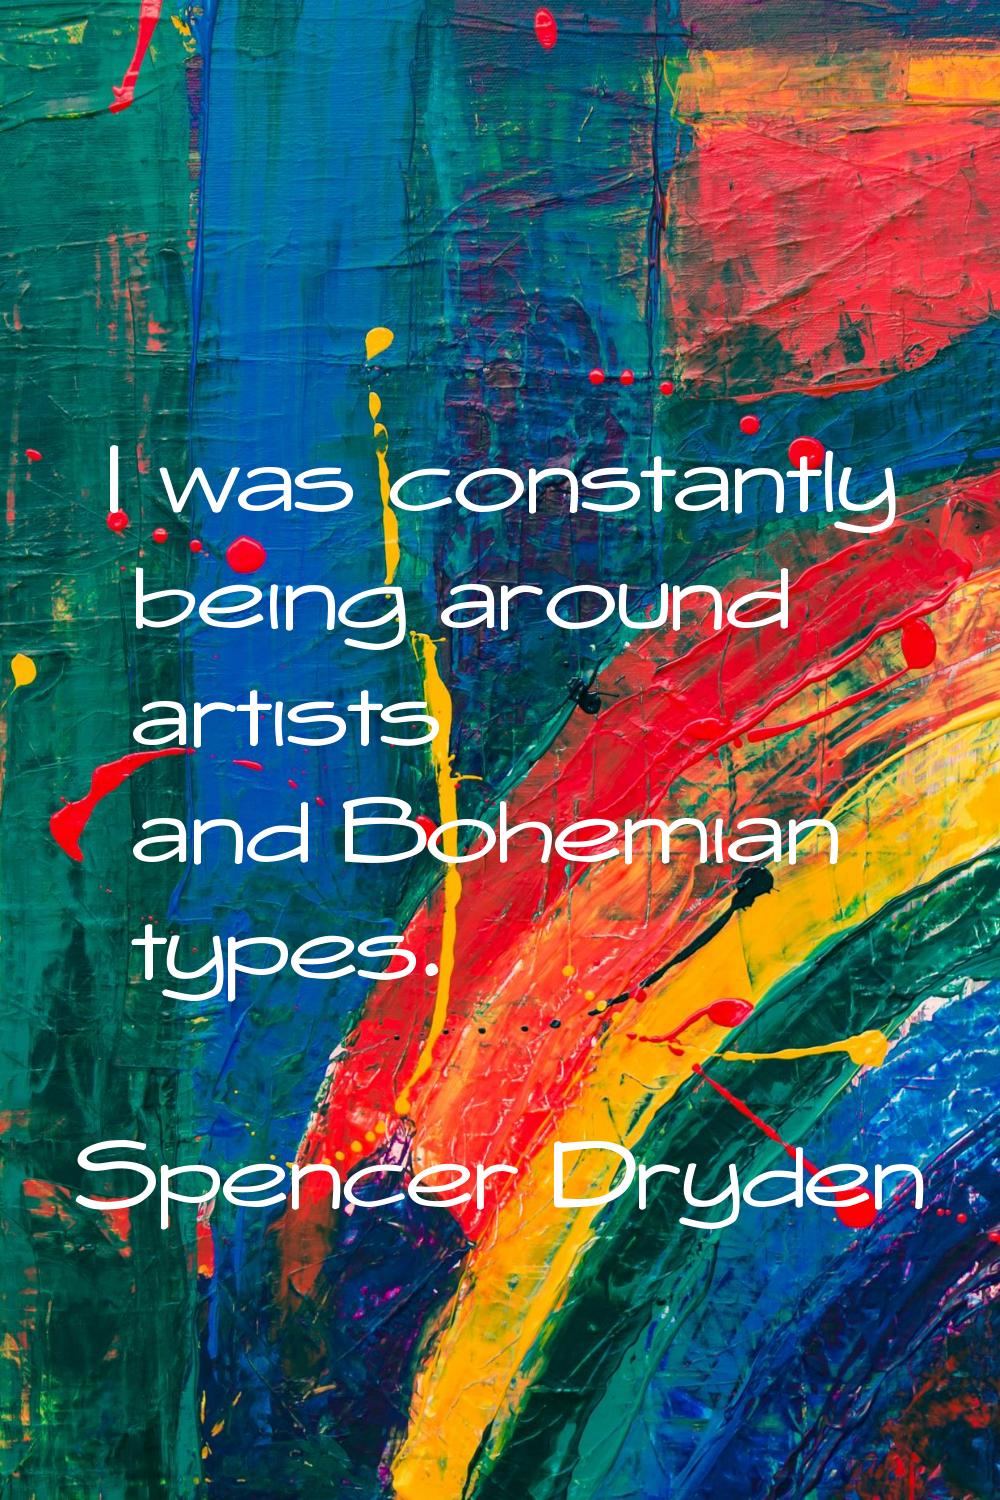 I was constantly being around artists and Bohemian types.